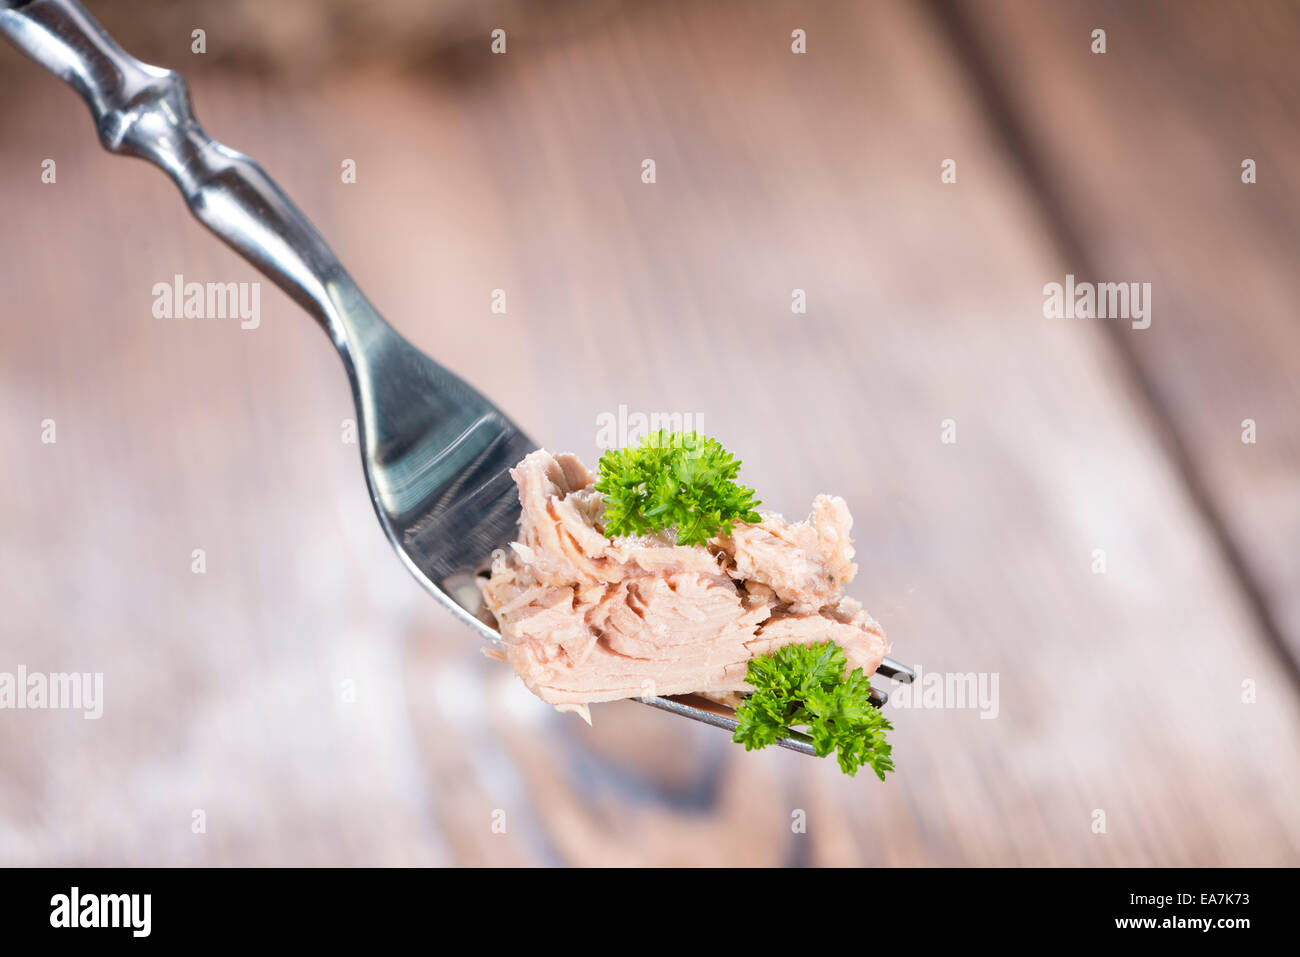 Portion of tuna (with parsley) on a fork as detailed close-up shot Stock Photo